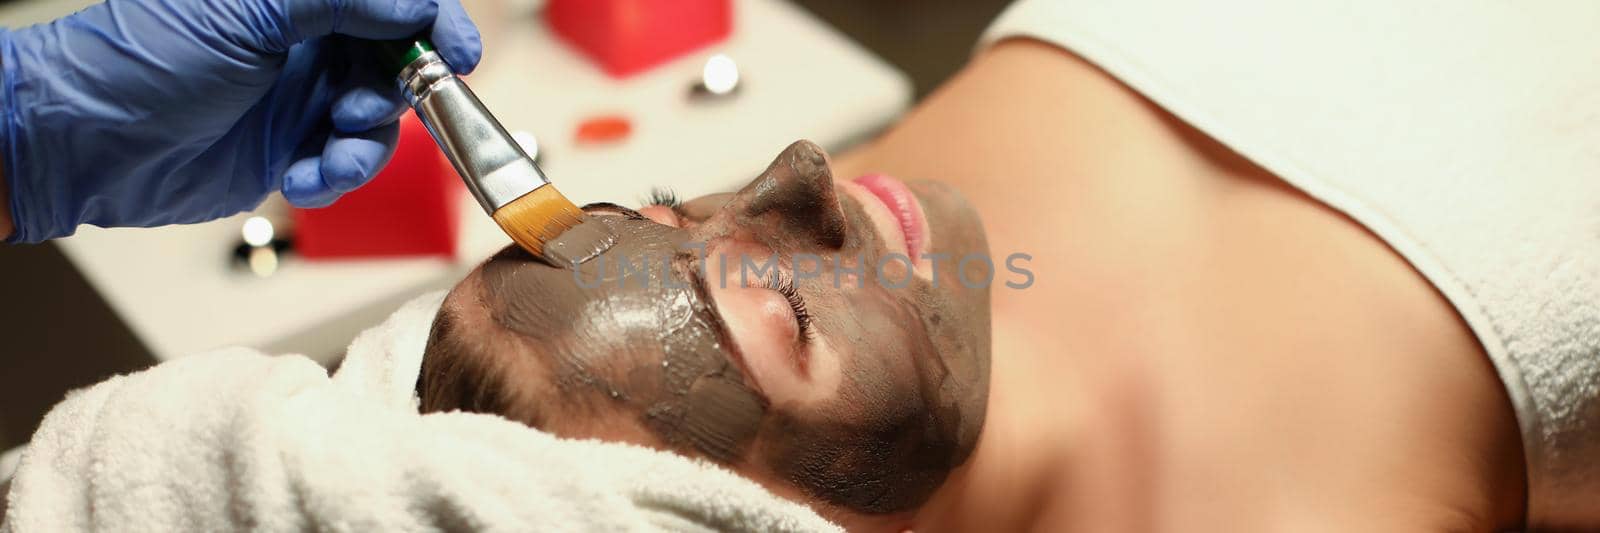 Spa centre worker applying clay mask on clients face with special tool by kuprevich